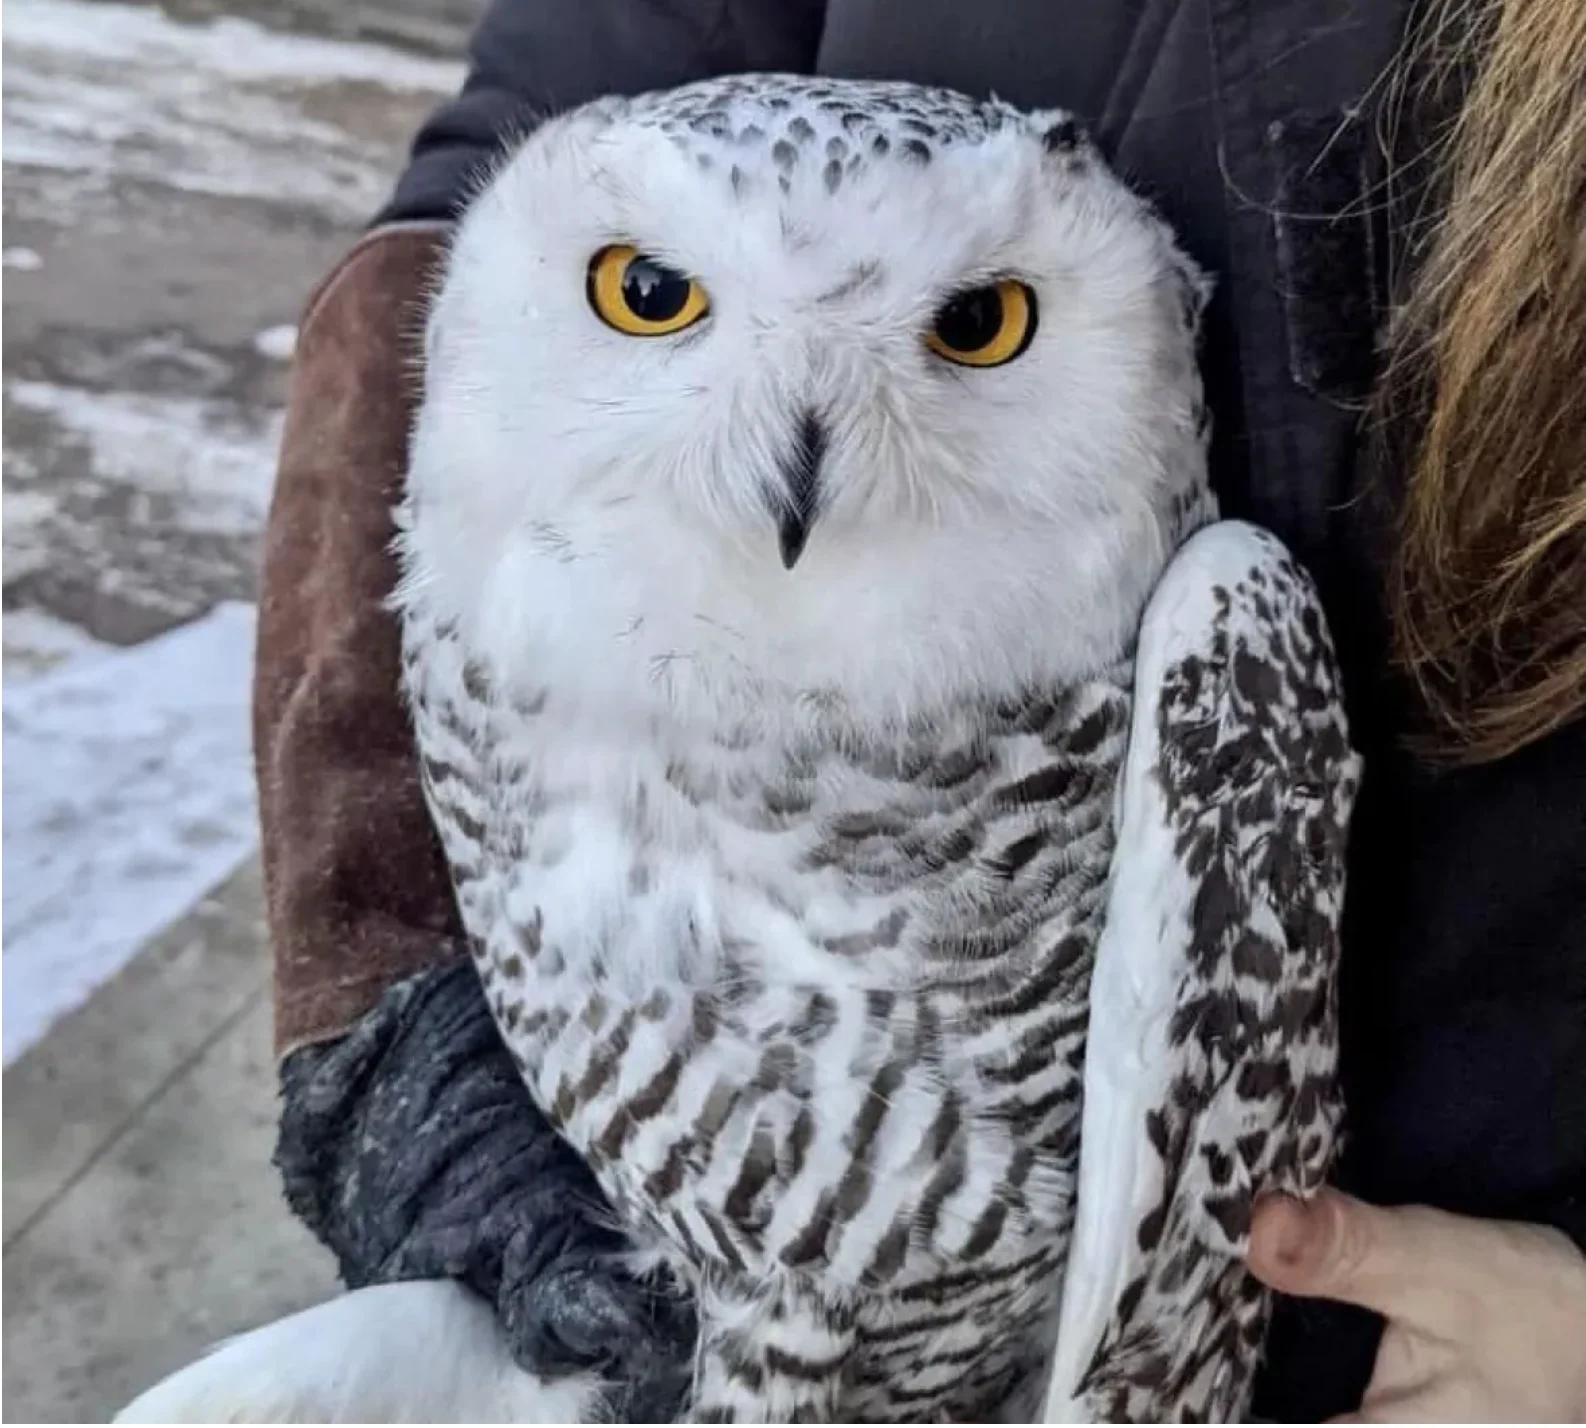 CBC: The snowy owl received treatment for a concussion, which she was woozy from last week, but Salthaven West's director of animal rehabilitation said she was more feisty and on the road to recovery in the following days. (Salthaven West/Facebook)